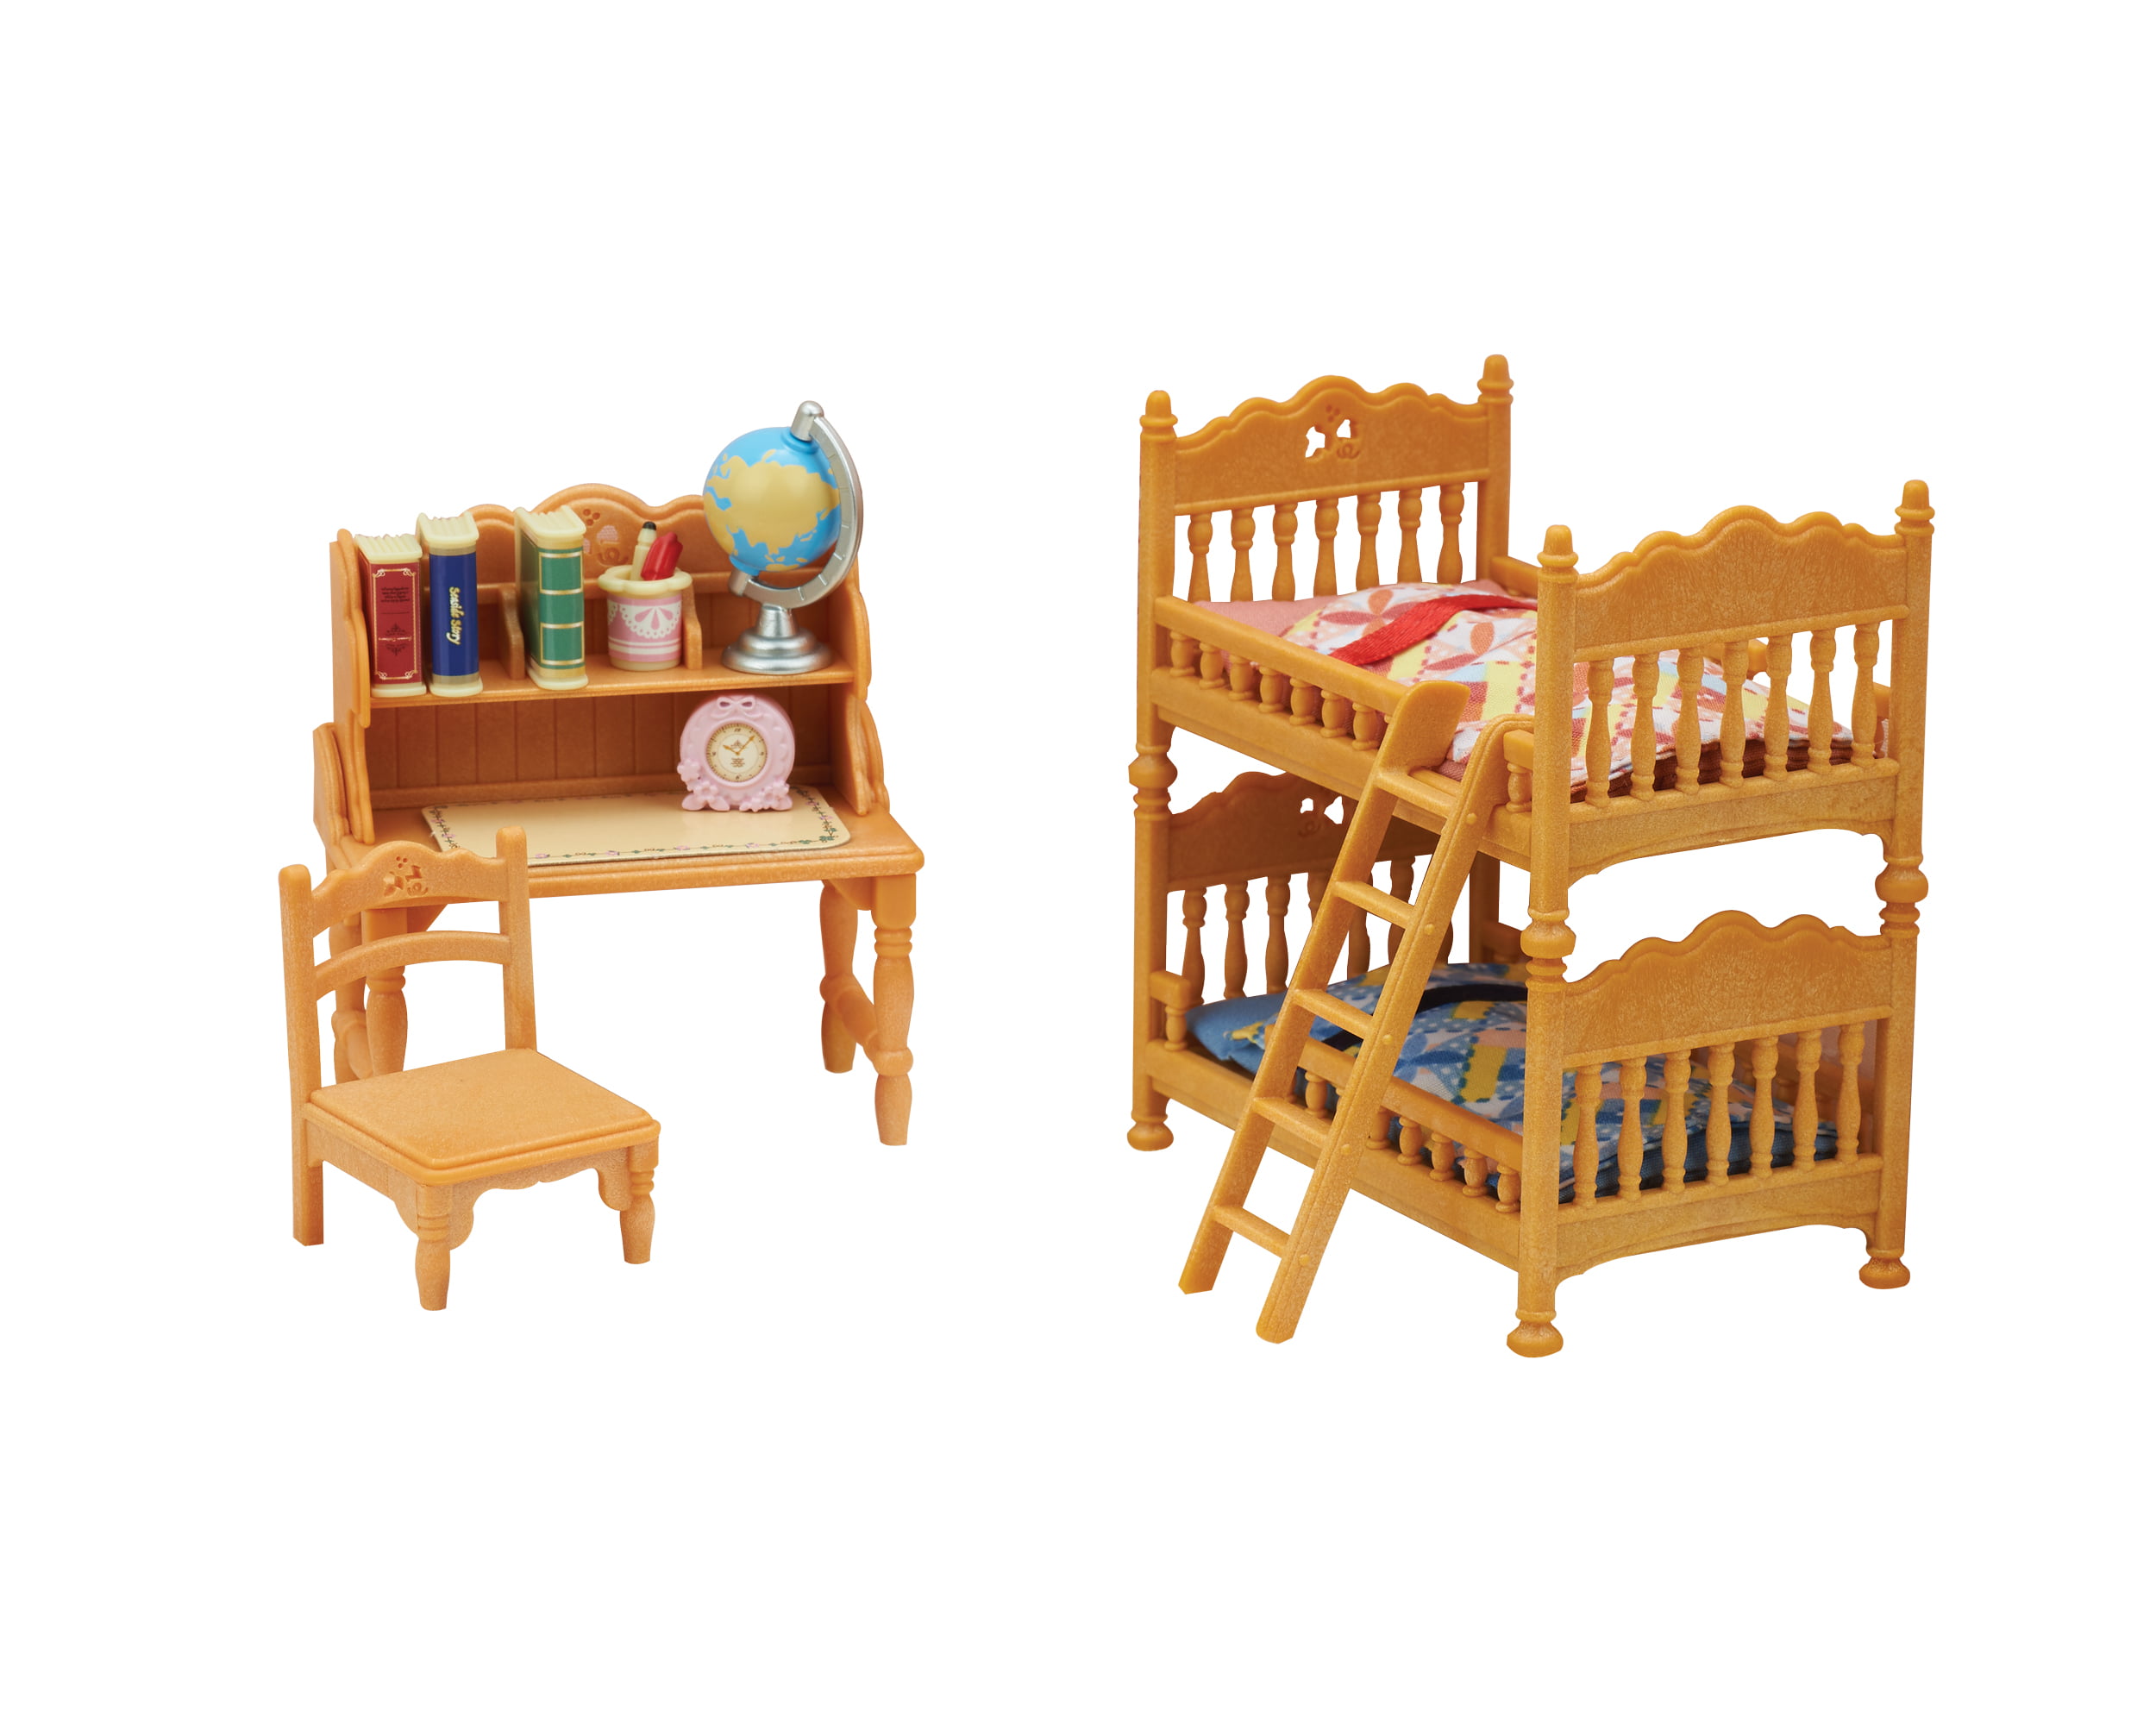 calico critters living room accessories set